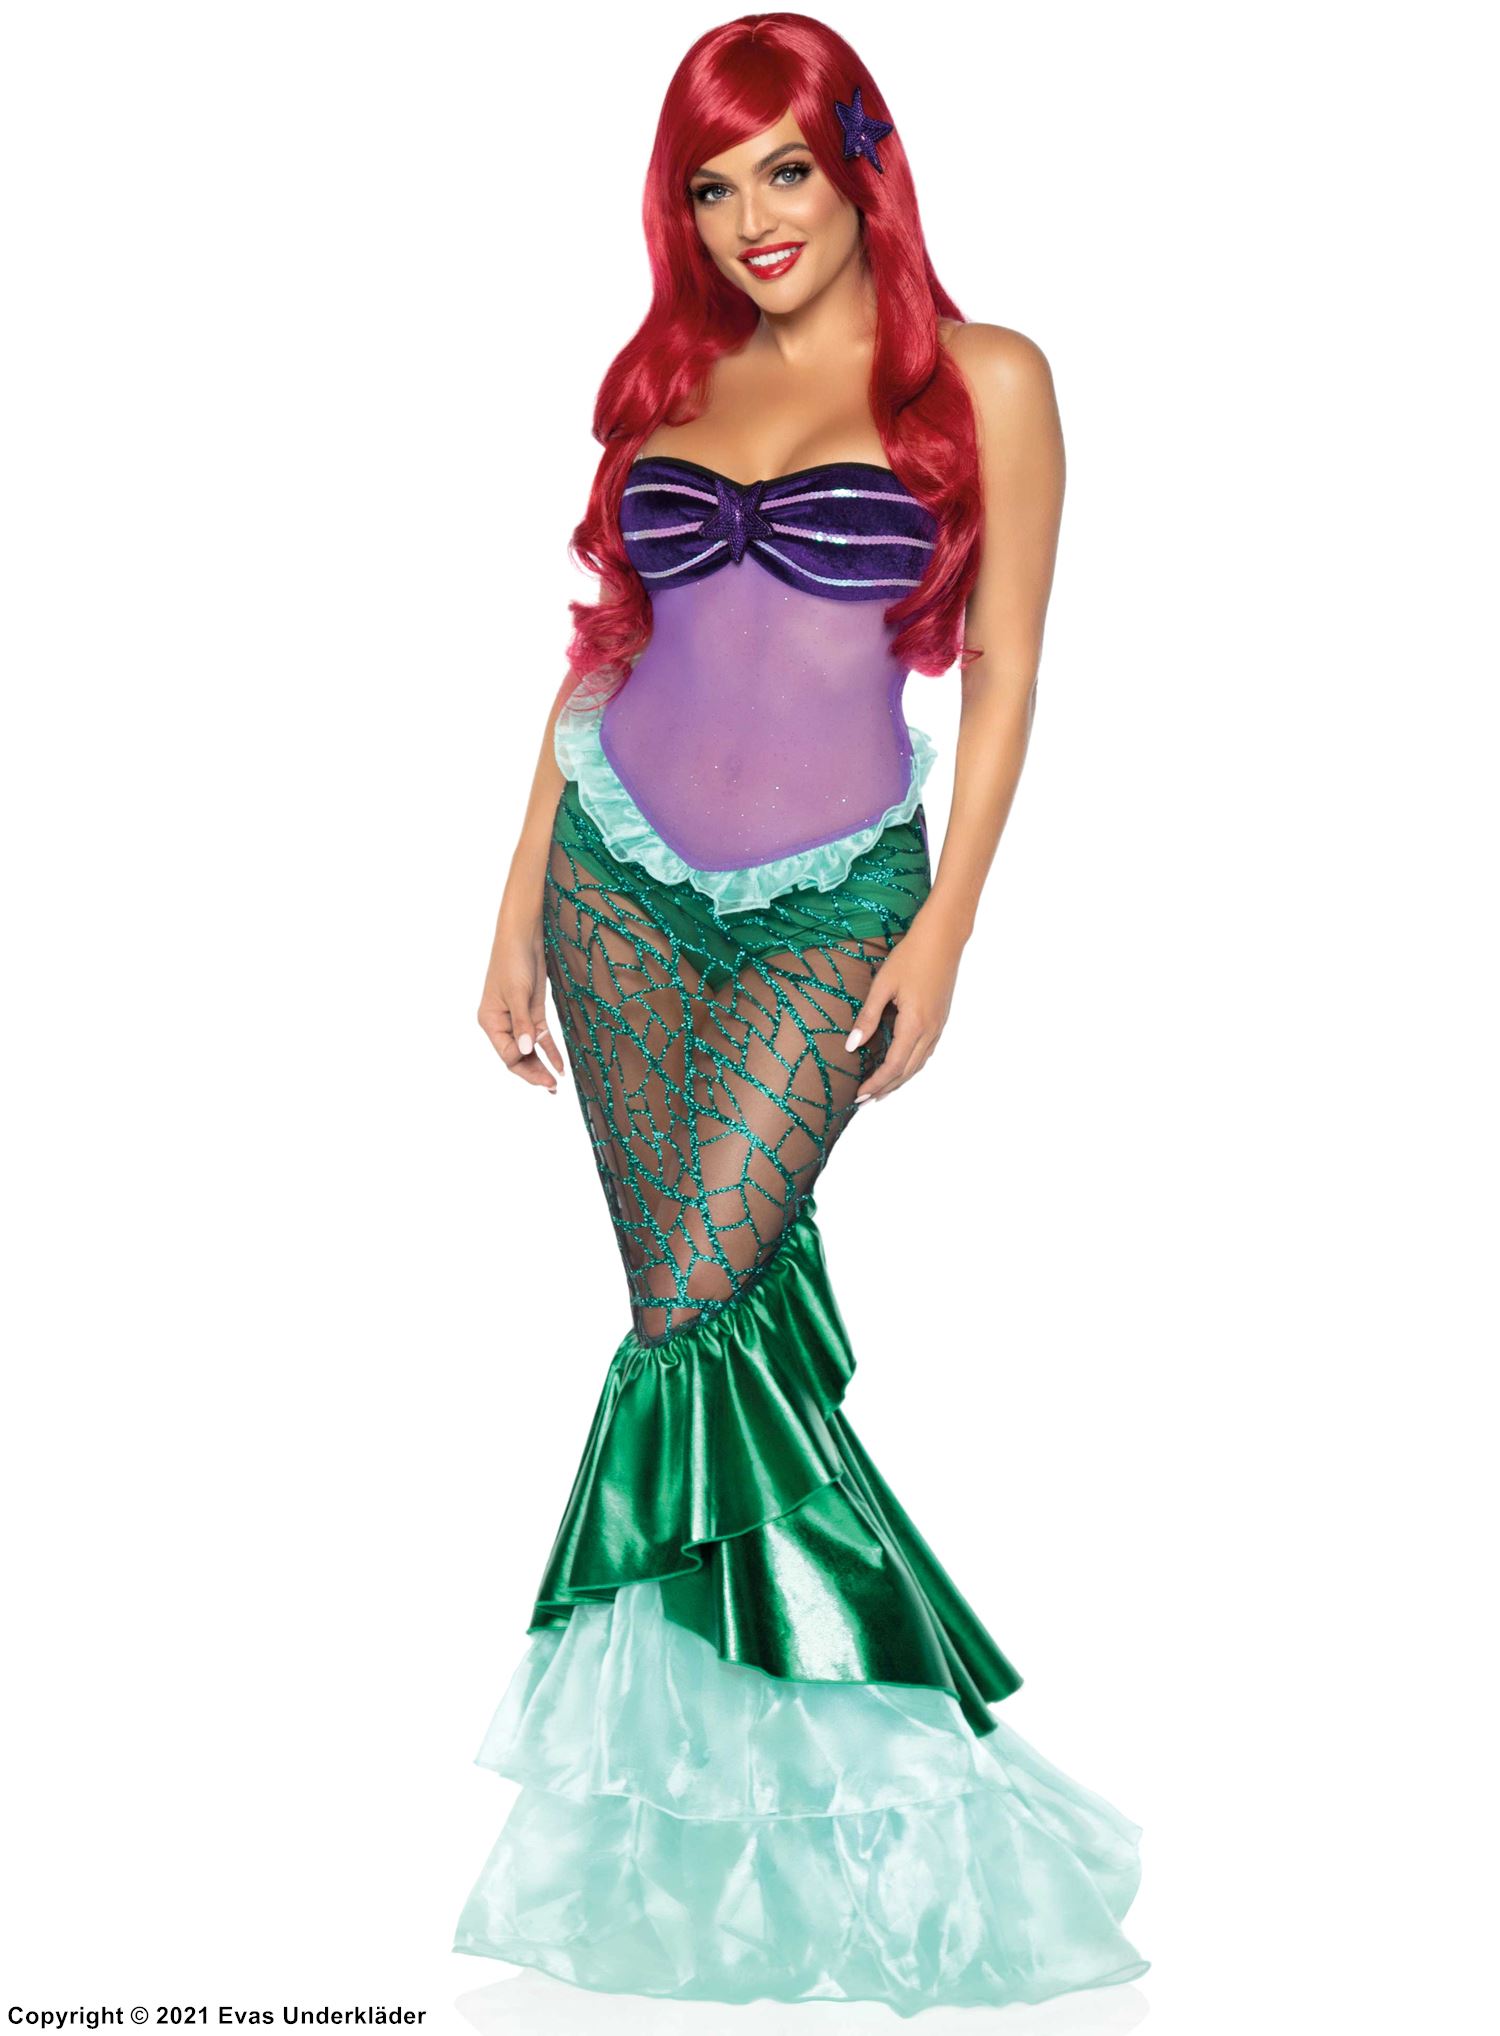 Ariel from The Little Mermaid, costume dress, sheer inlays, ruffle trim, built-in panty